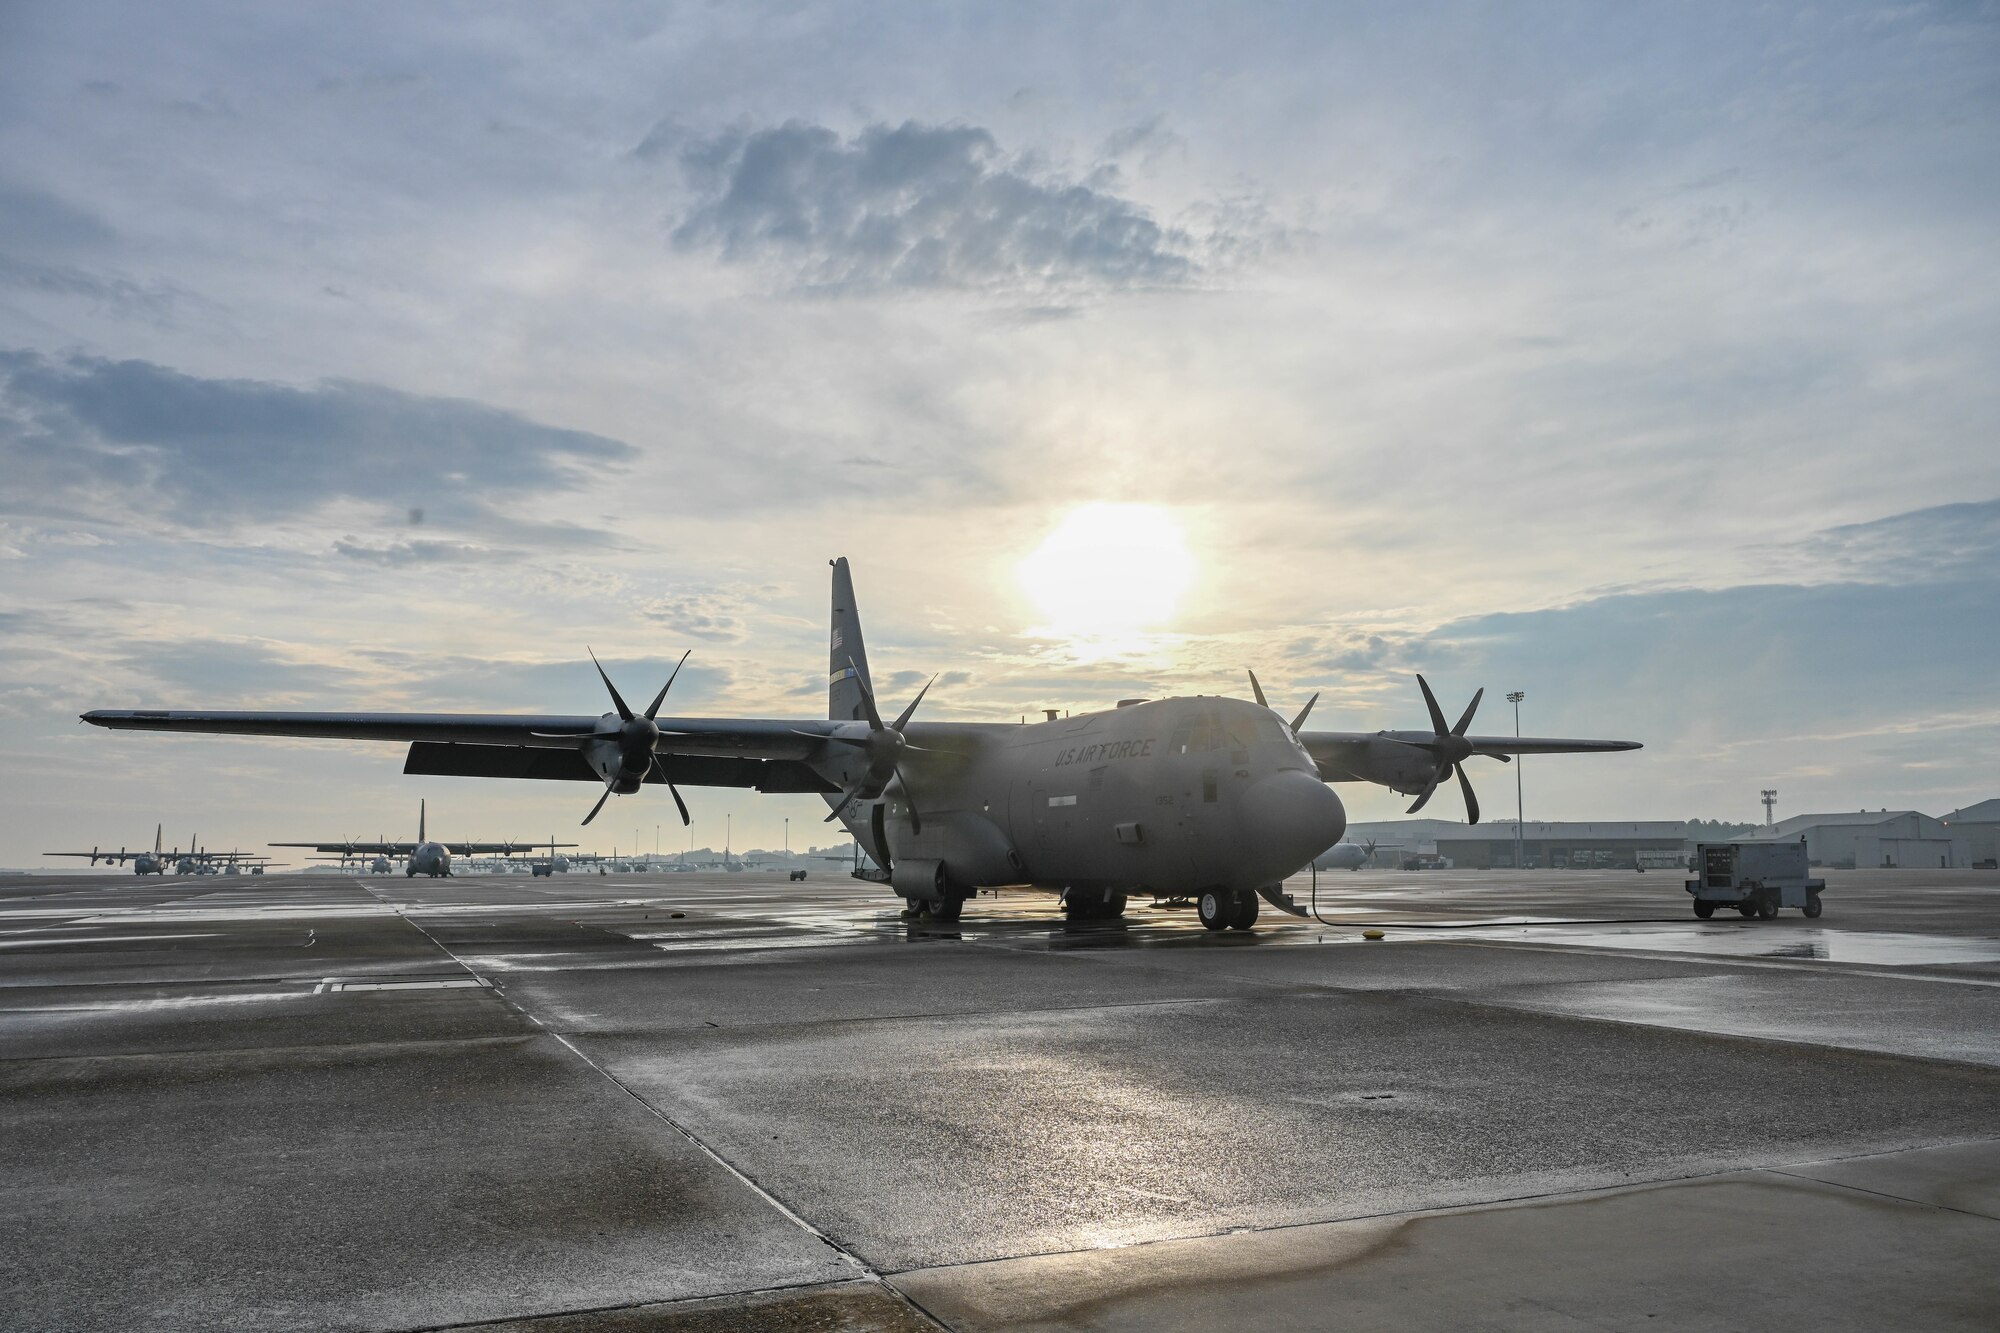 A C-130 is parked on a flightline.